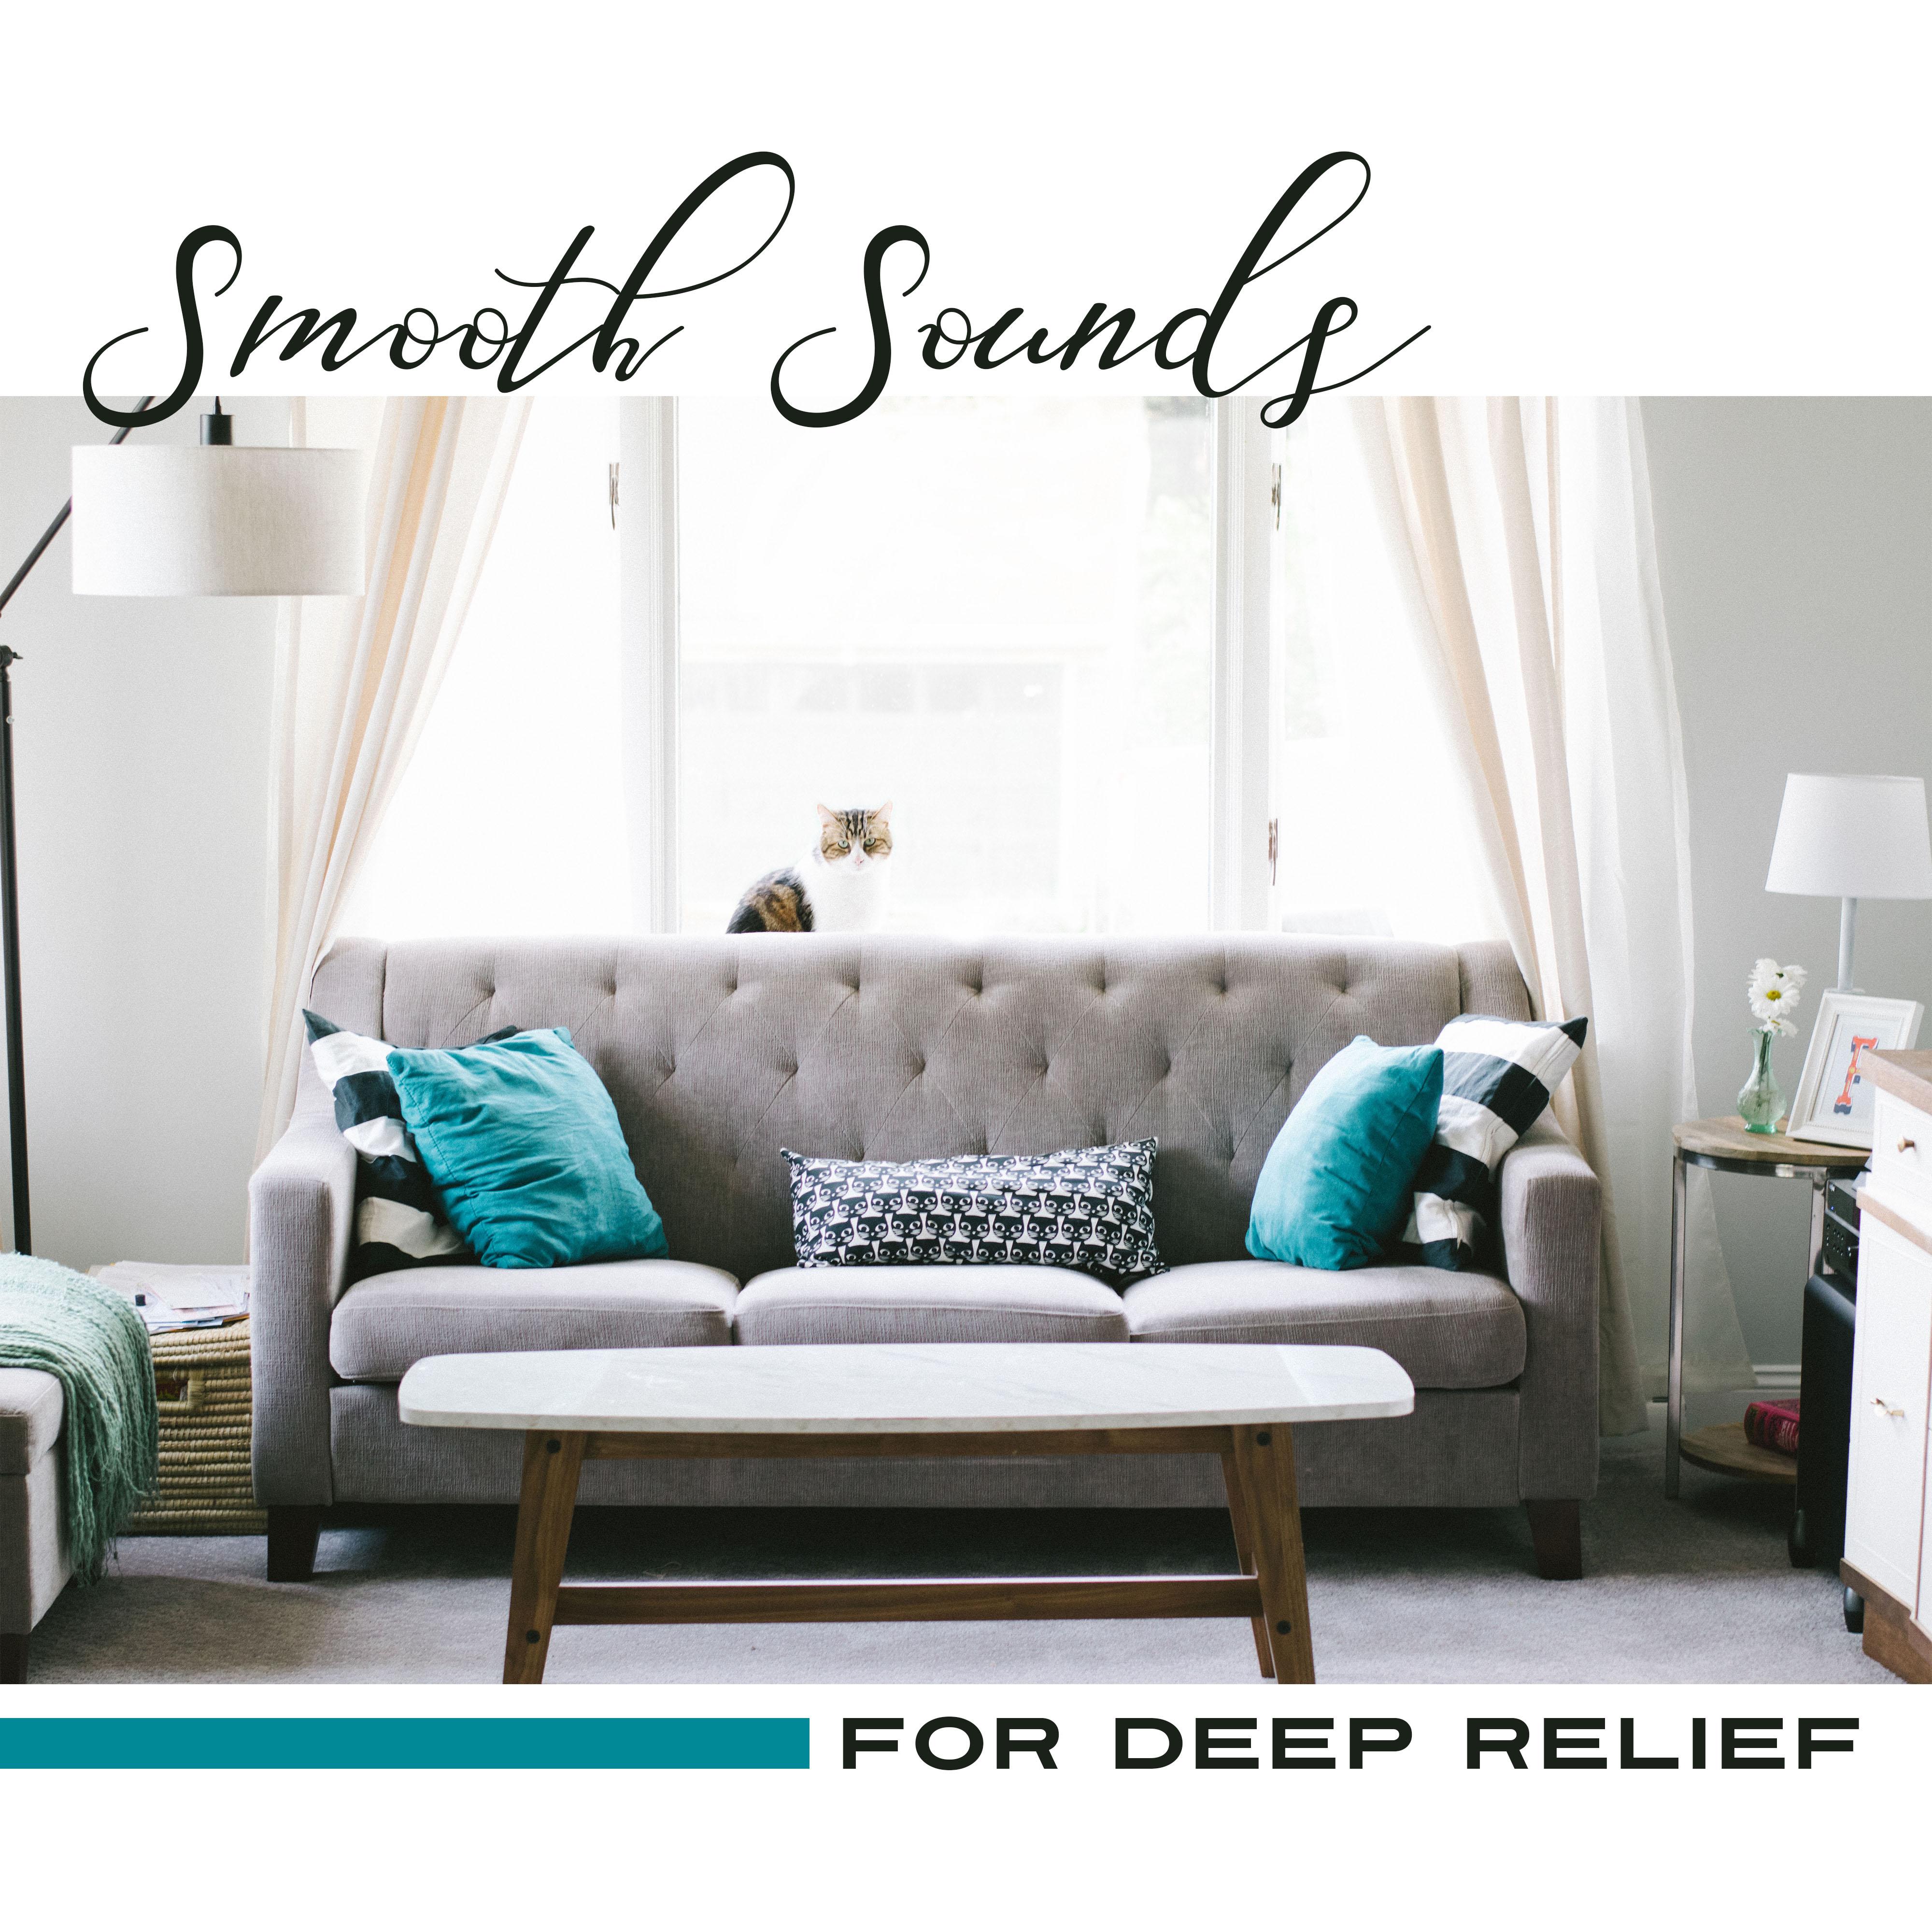 Smooth Sounds for Deep Relief – Instrumental Jazz for Healing, Relaxation, Coffee Rest, Stress Free, Mellow Jazz, Chill Out, Restaurant Music